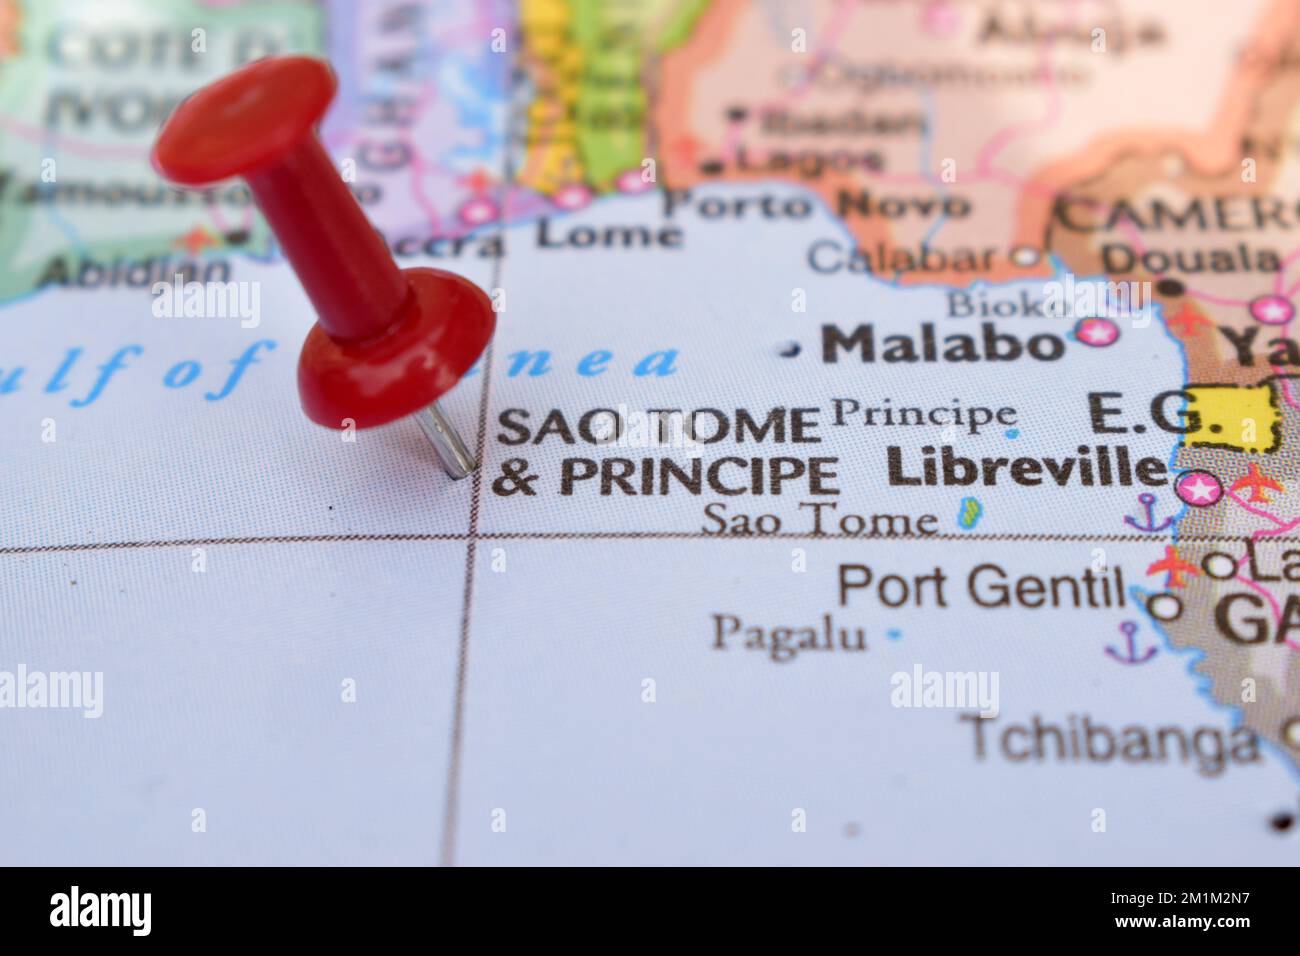 Red Push Pin Pointing on Location of Sao Tome & Principe World Map Close-Up View Stock Photograph Stock Photo